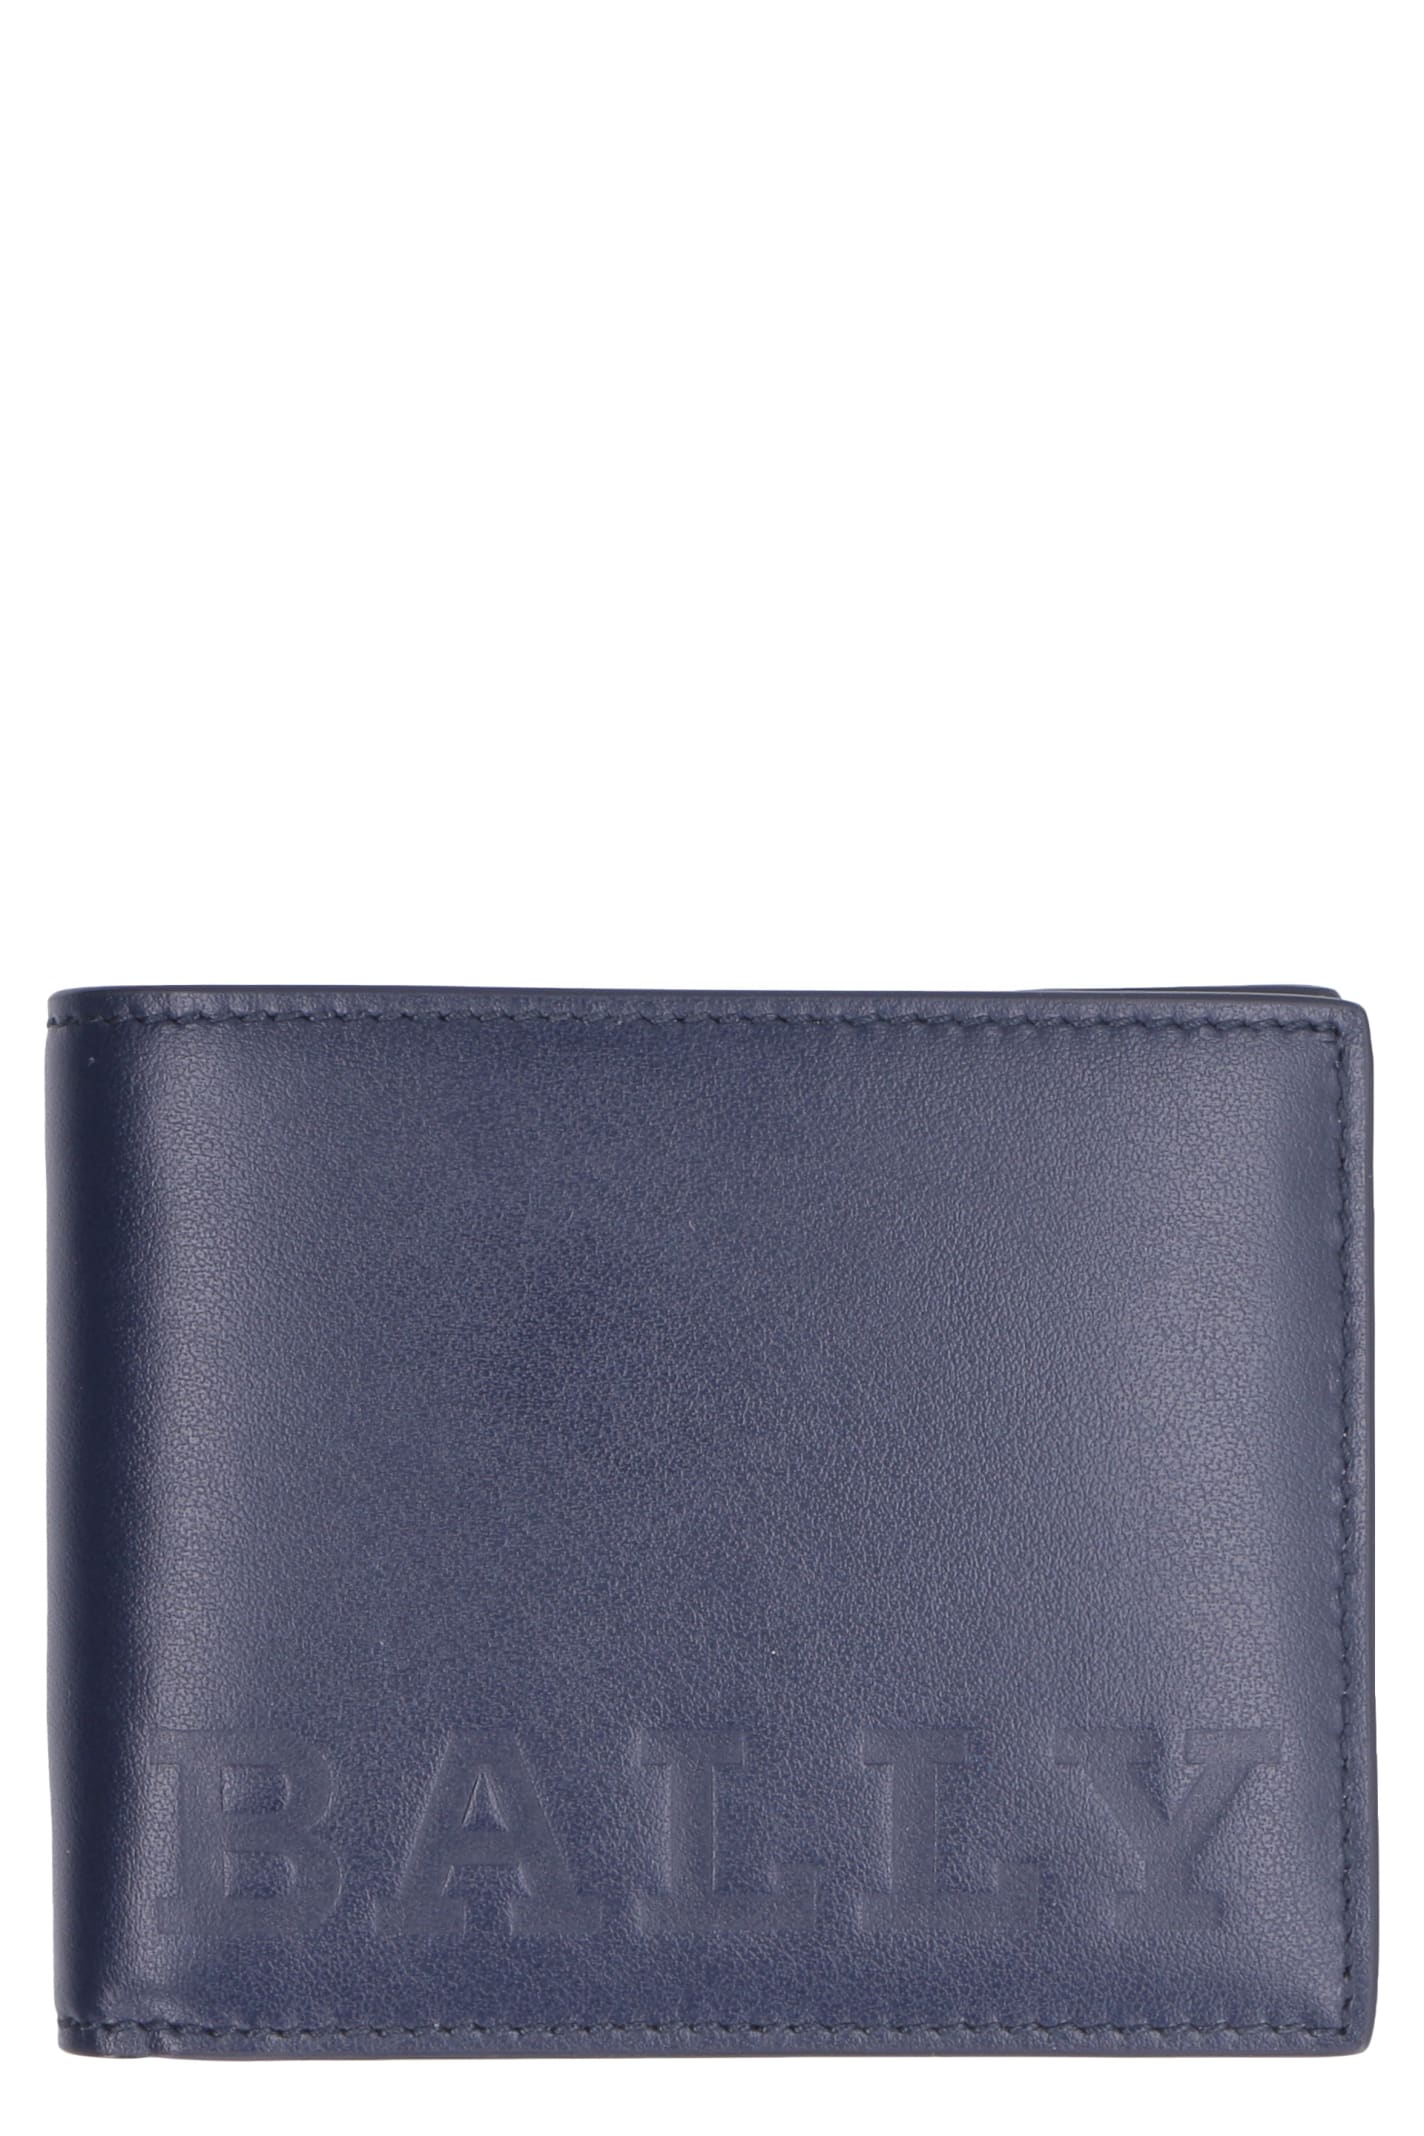 Bally Bevye Leather Flap-over Wallet